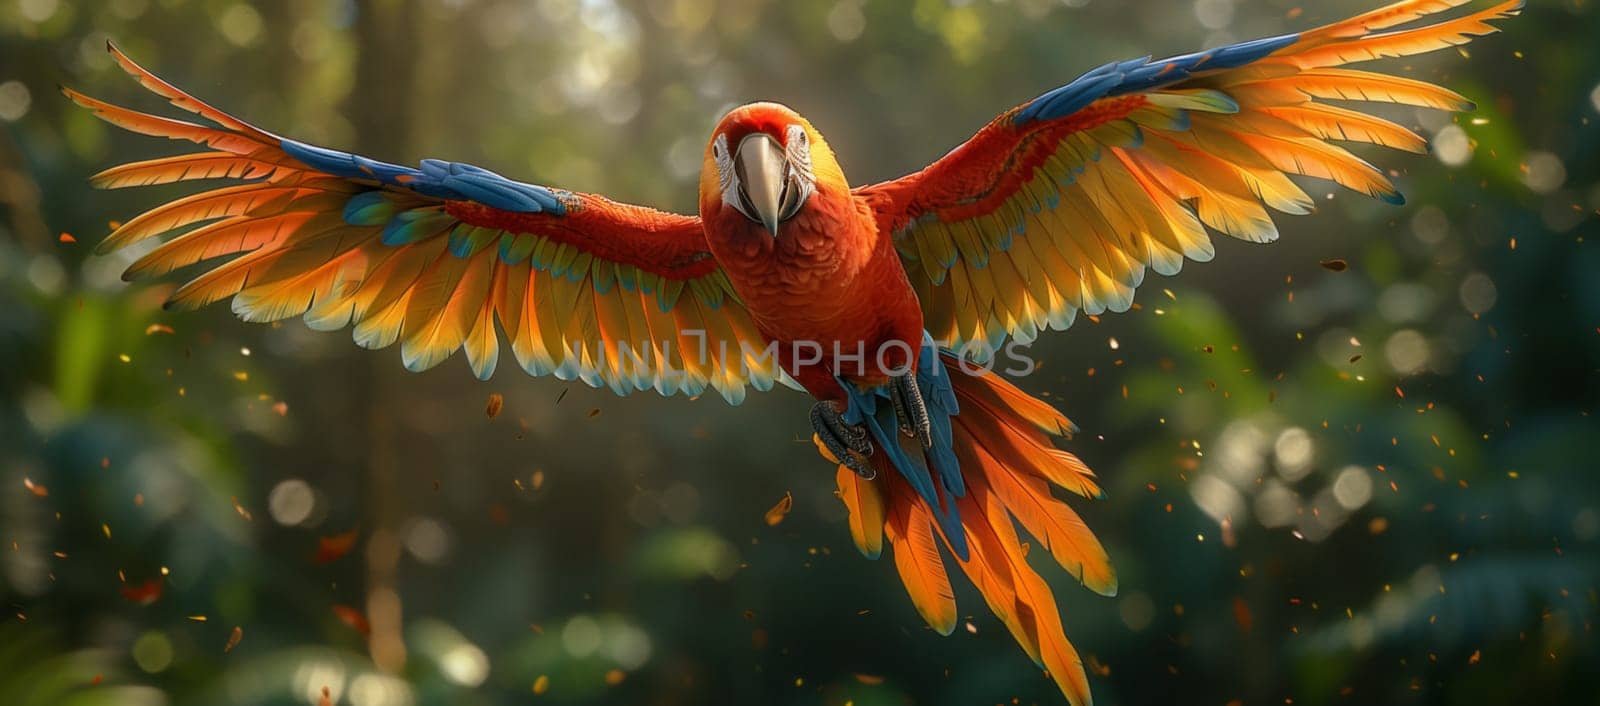 A vibrant parrot with colorful feathers is soaring through the sky in the jungle, showcasing its magnificent wings and distinctive tail